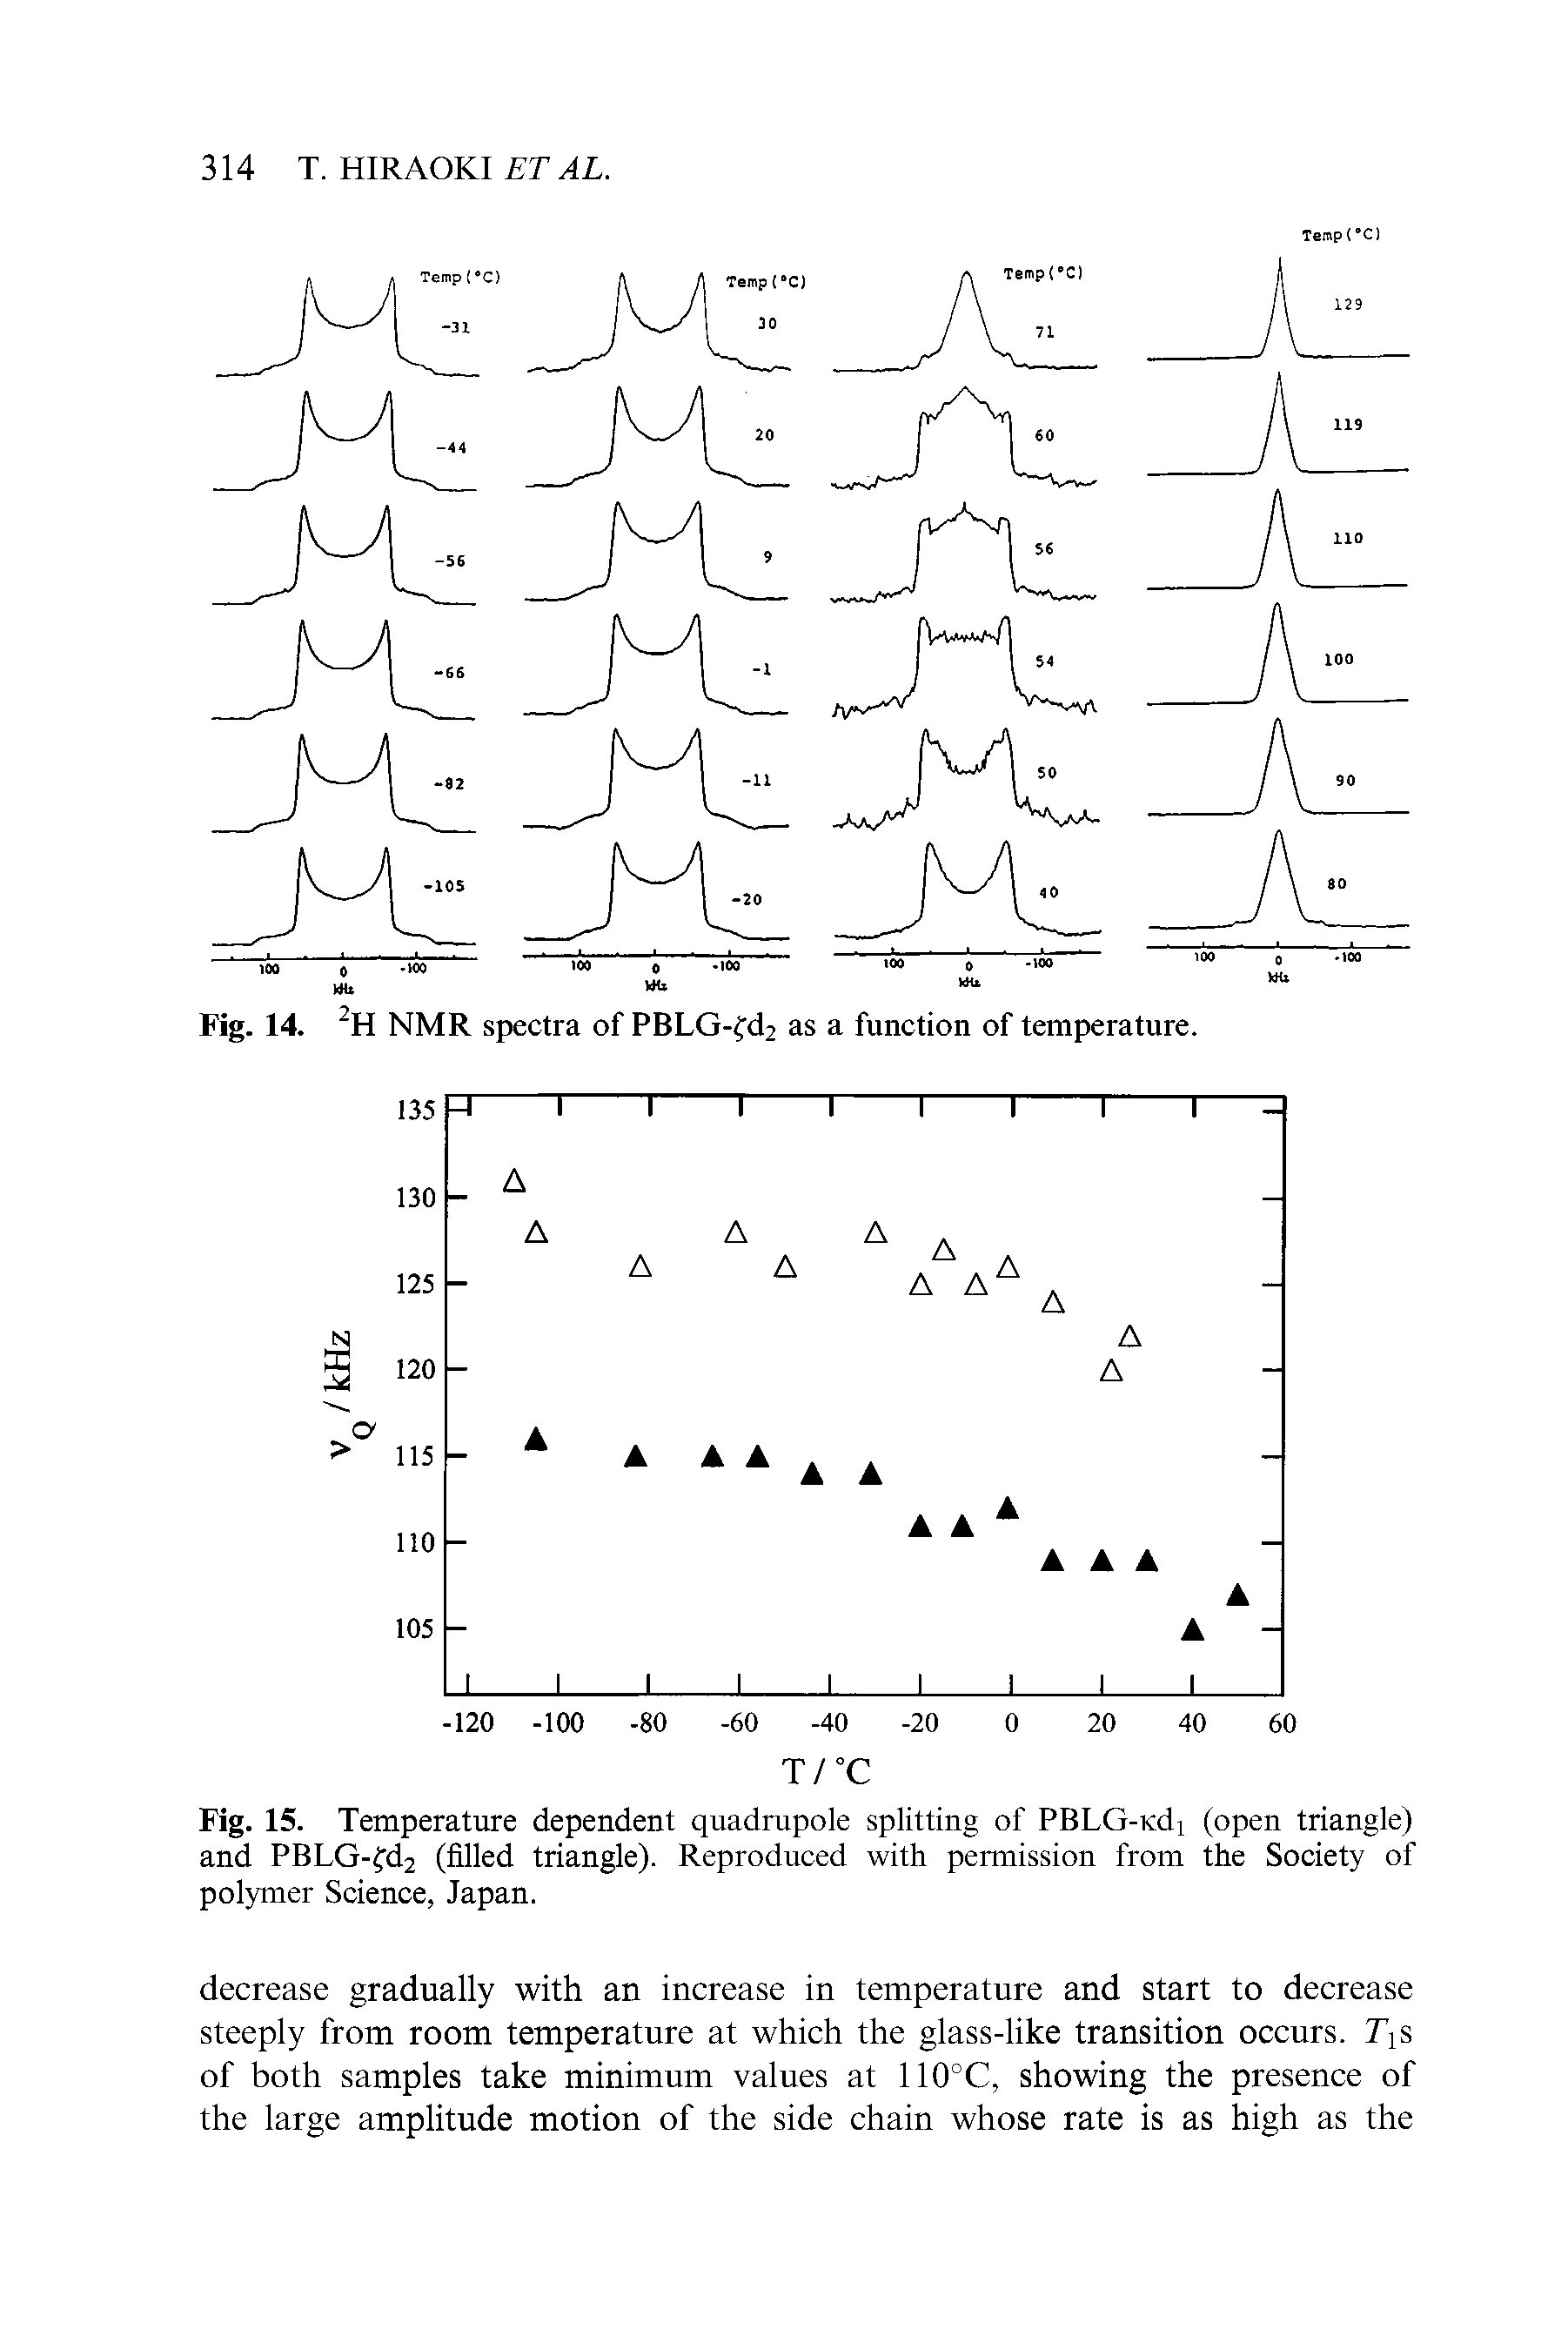 Fig. 15. Temperature dependent quadrupole splitting of PBLG-Kdi (open triangle) and PBLG-fd2 (filled triangle). Reproduced with permission from the Society of polymer Science, Japan.